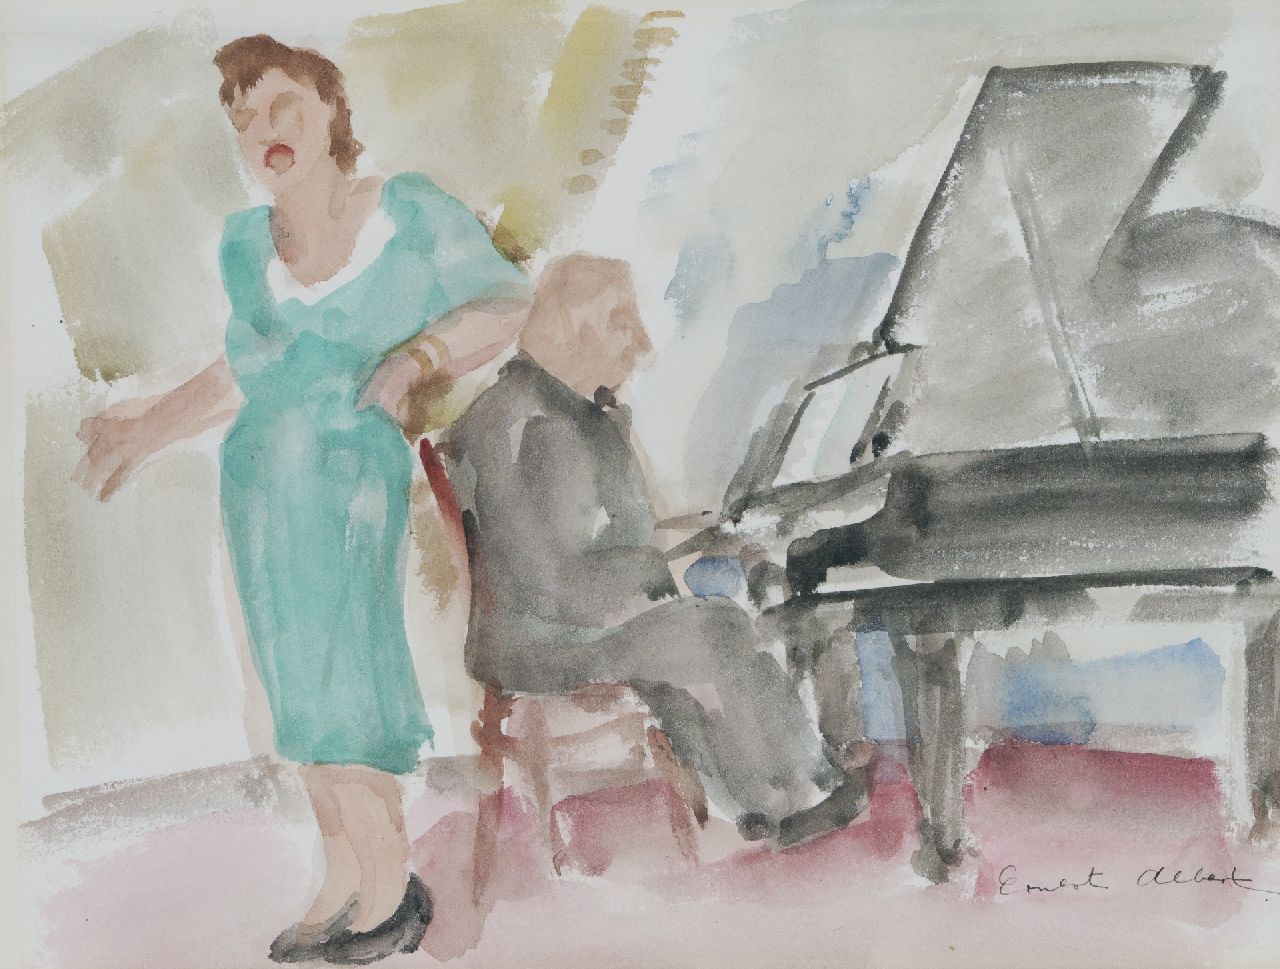 Albert E.  | Ernest Albert | Watercolours and drawings offered for sale | The recital, watercolour on paper 26.0 x 34.5 cm, signed l.r.